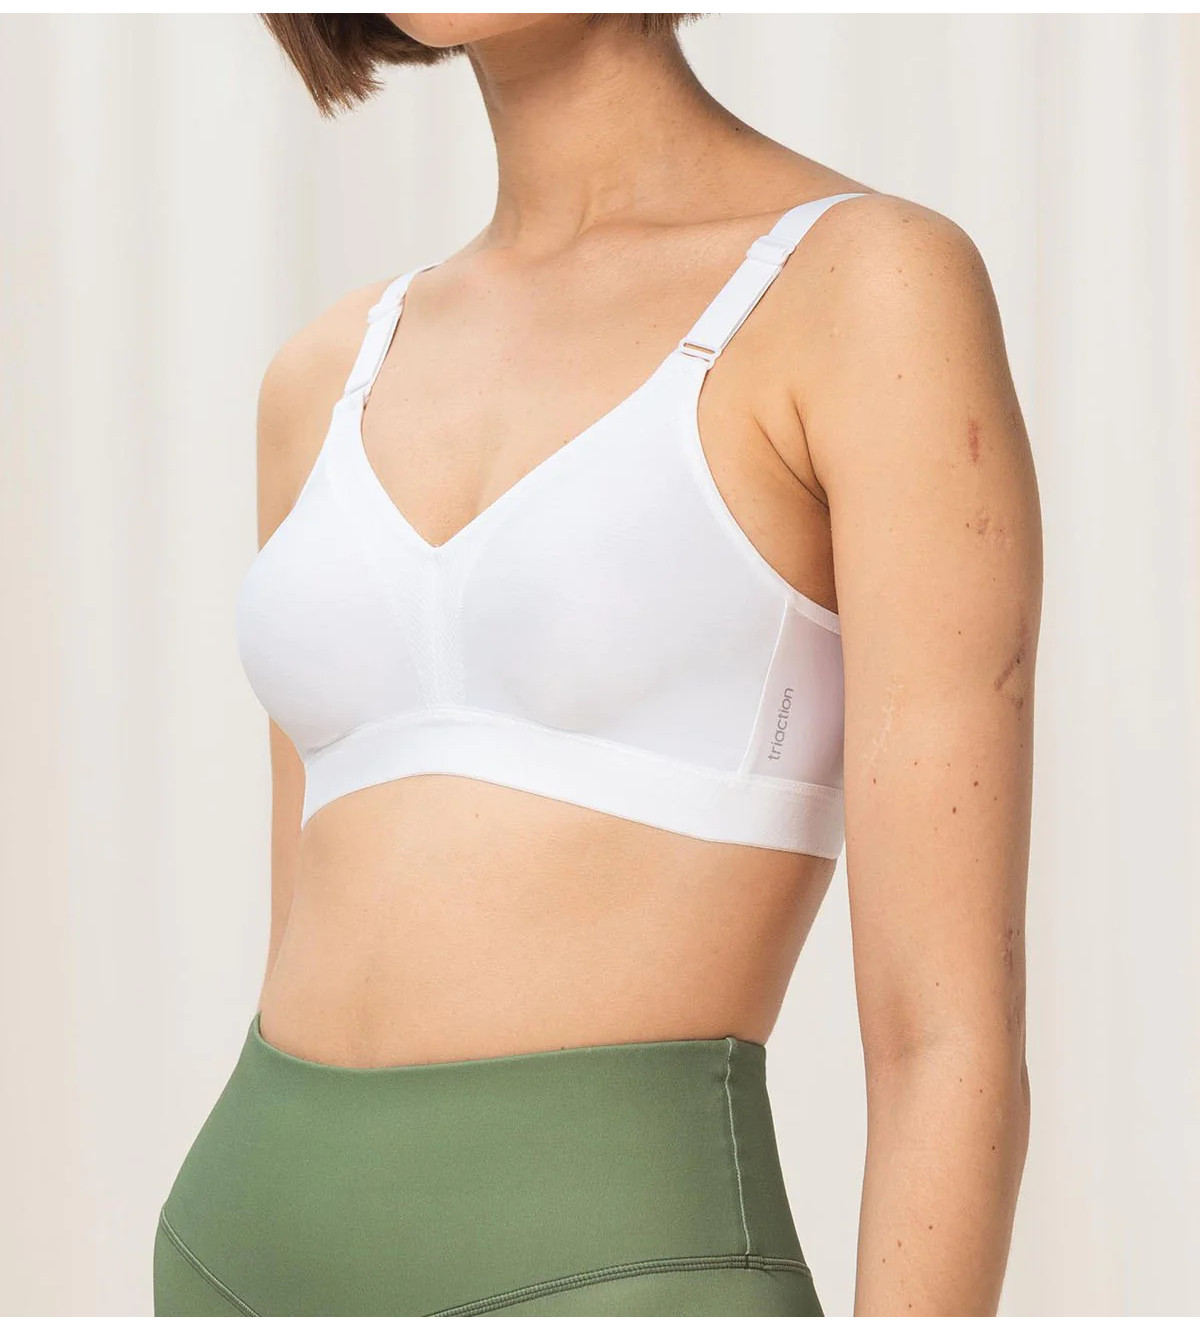  Triumph Triaction Wellness Non-Wired Sports Bra White (0003)  38B CS : Clothing, Shoes & Jewelry